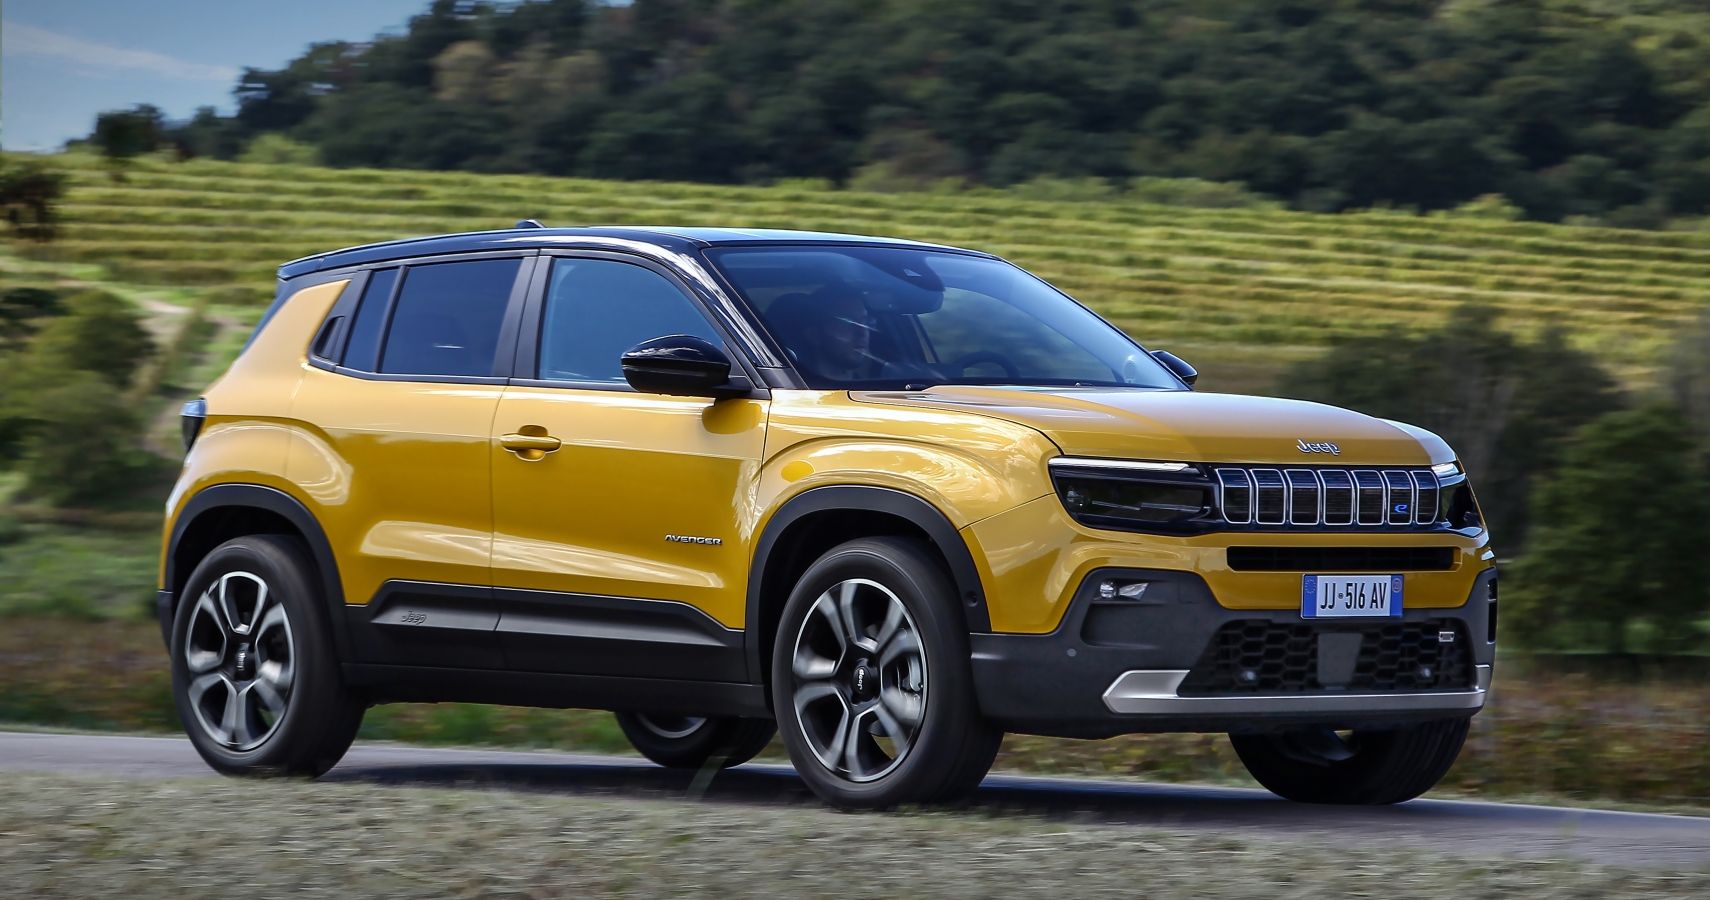 Everything You Need To Know About The Jeep Avenger All-Electric SUV